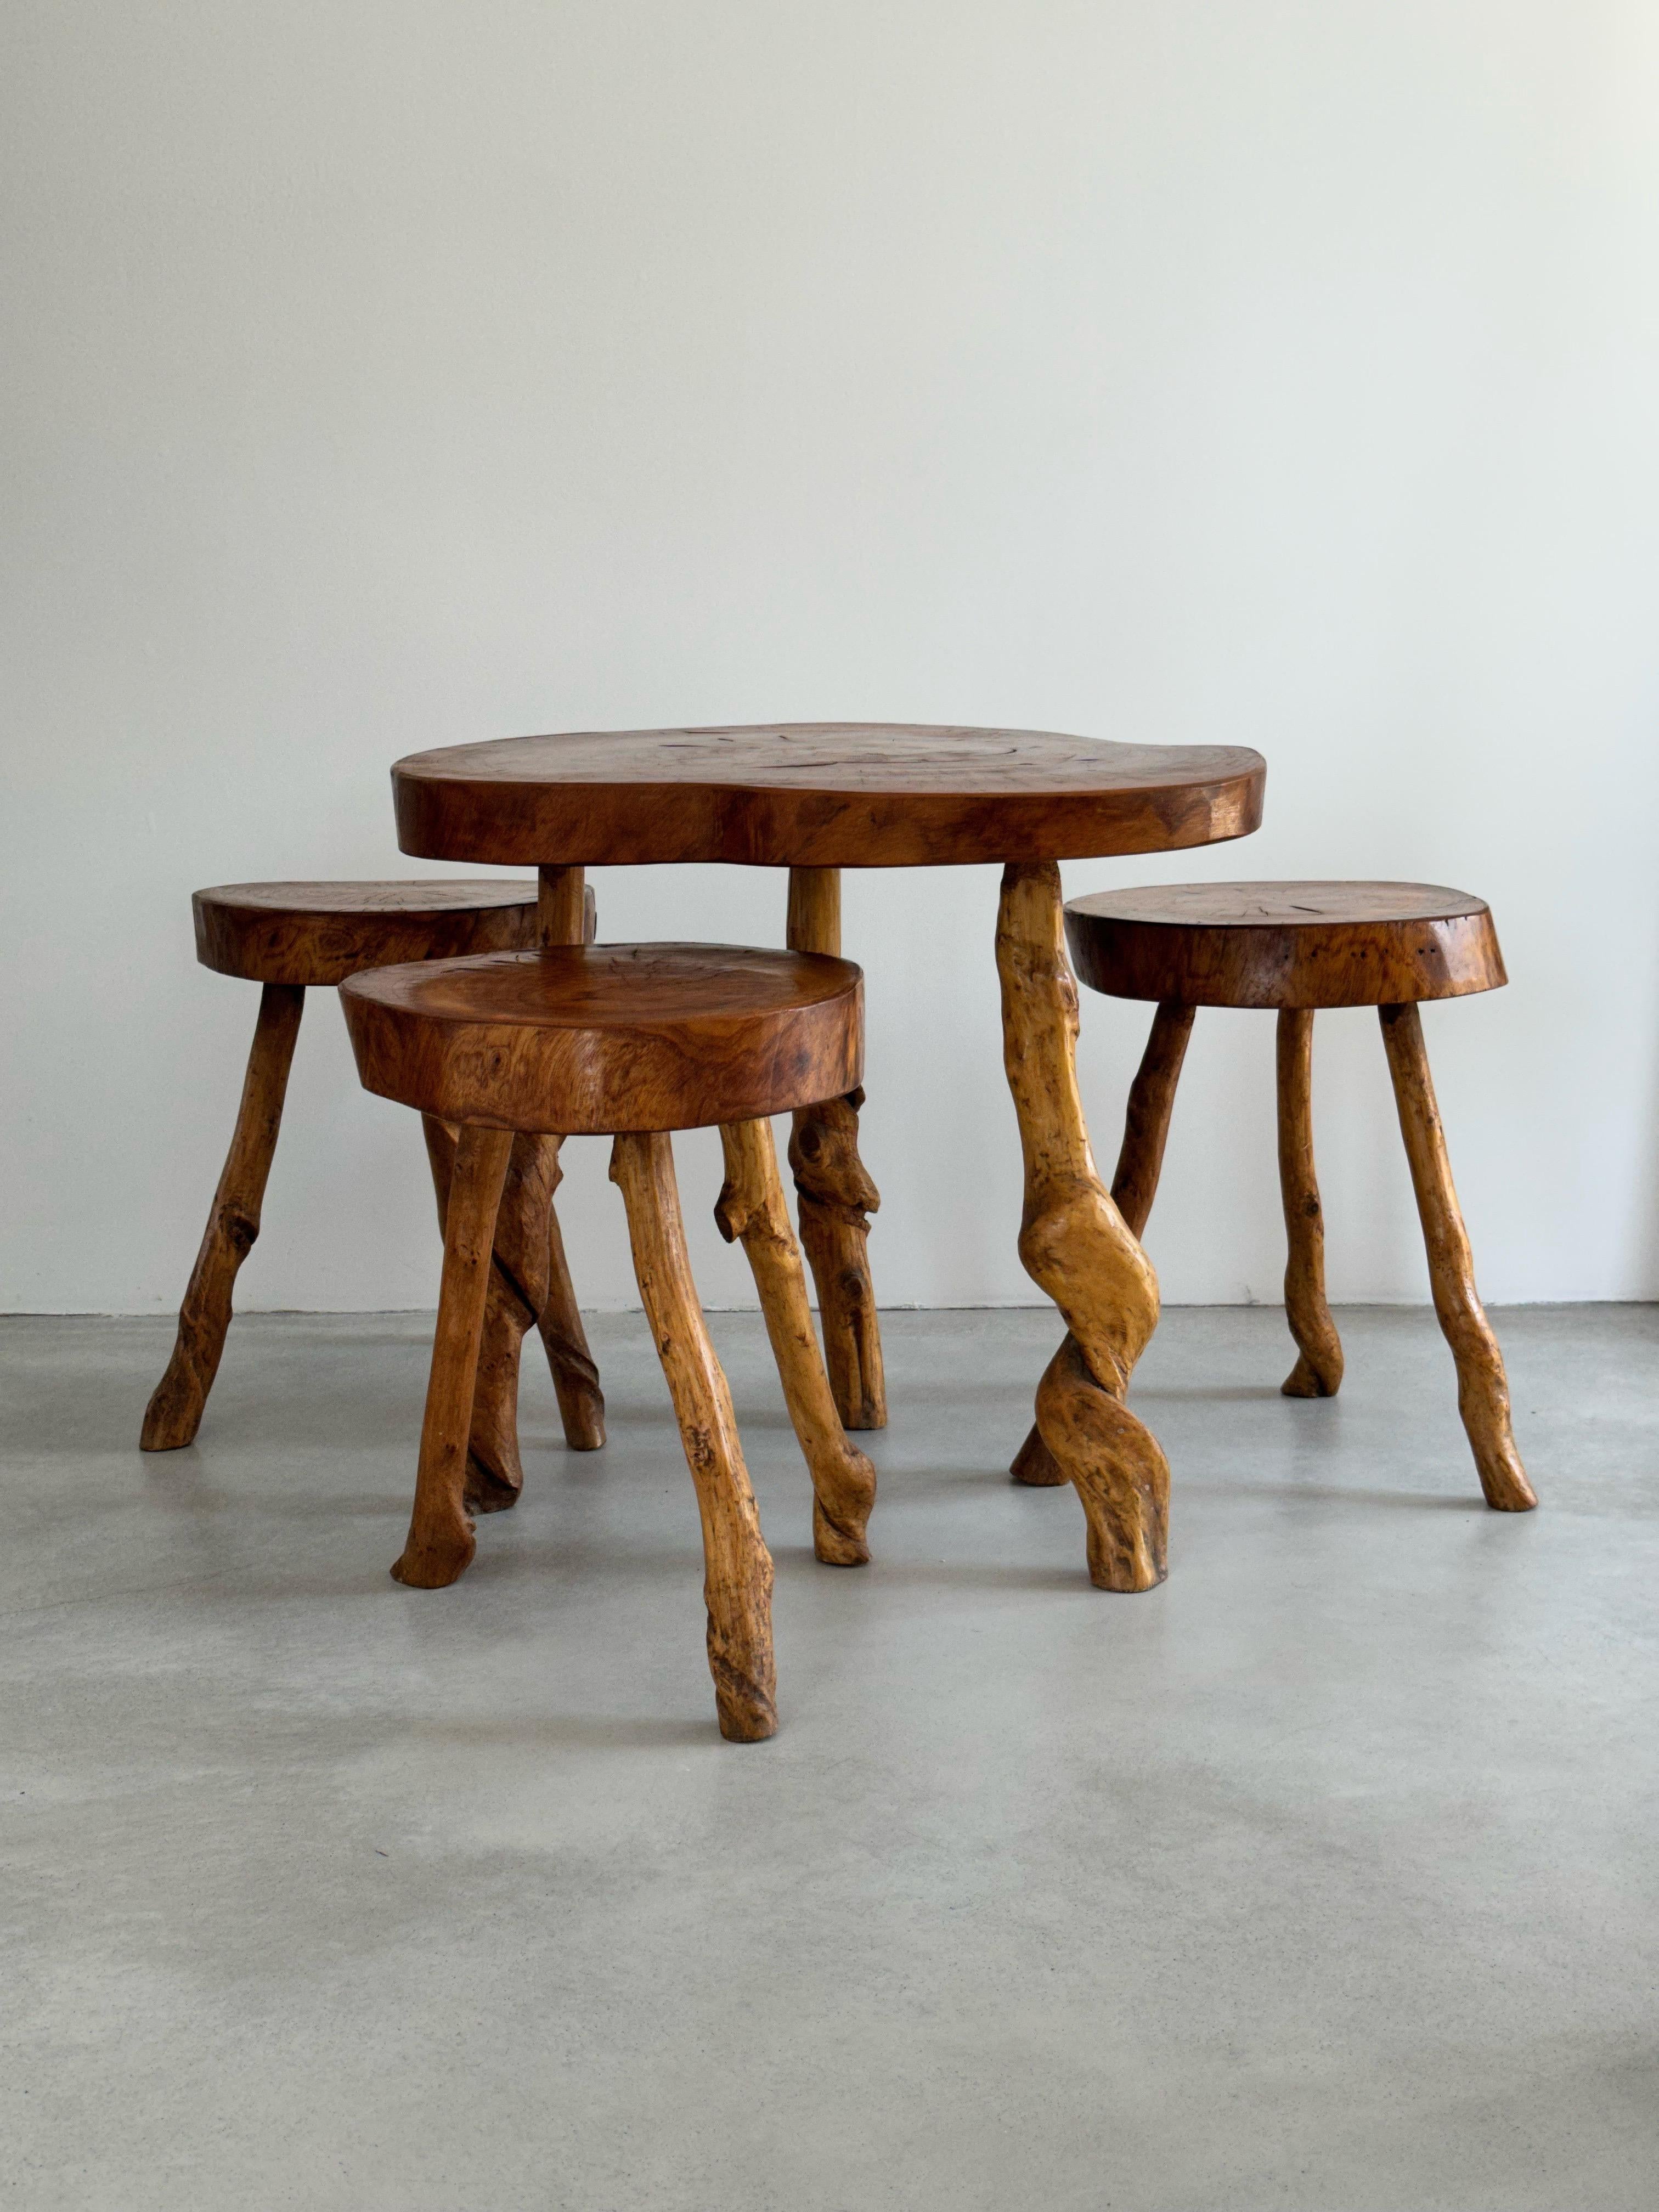 This primitive set was produced by a French craftsman in the 1960s. 
The stools all have a slightly different shape, the table is of the same construction, which gives them their rustic and naturalistic appearance. 
The stools and the table have